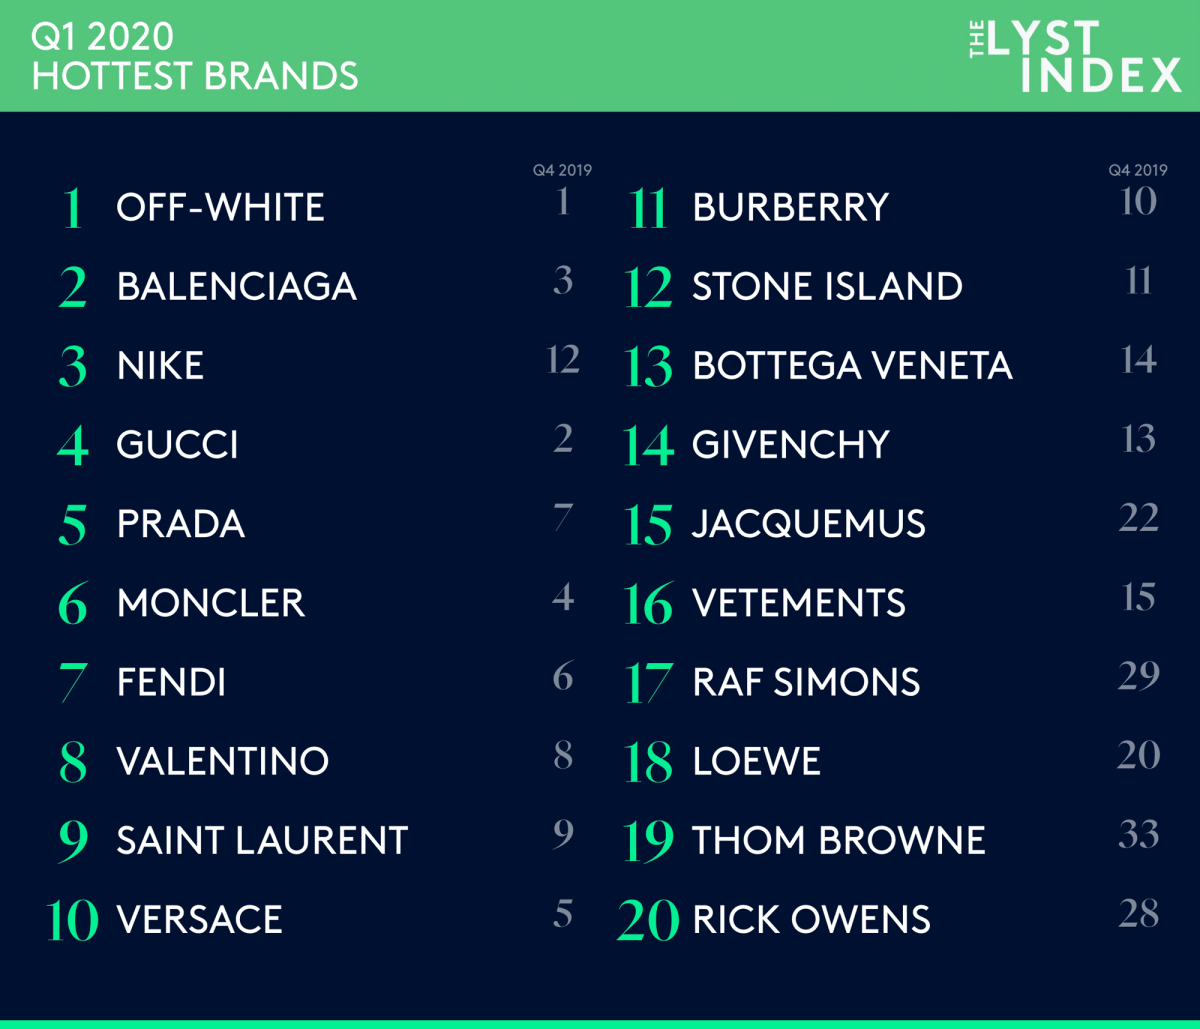 The Lyst Index Q1 2020's ranking of the top 20 hottest brands. 